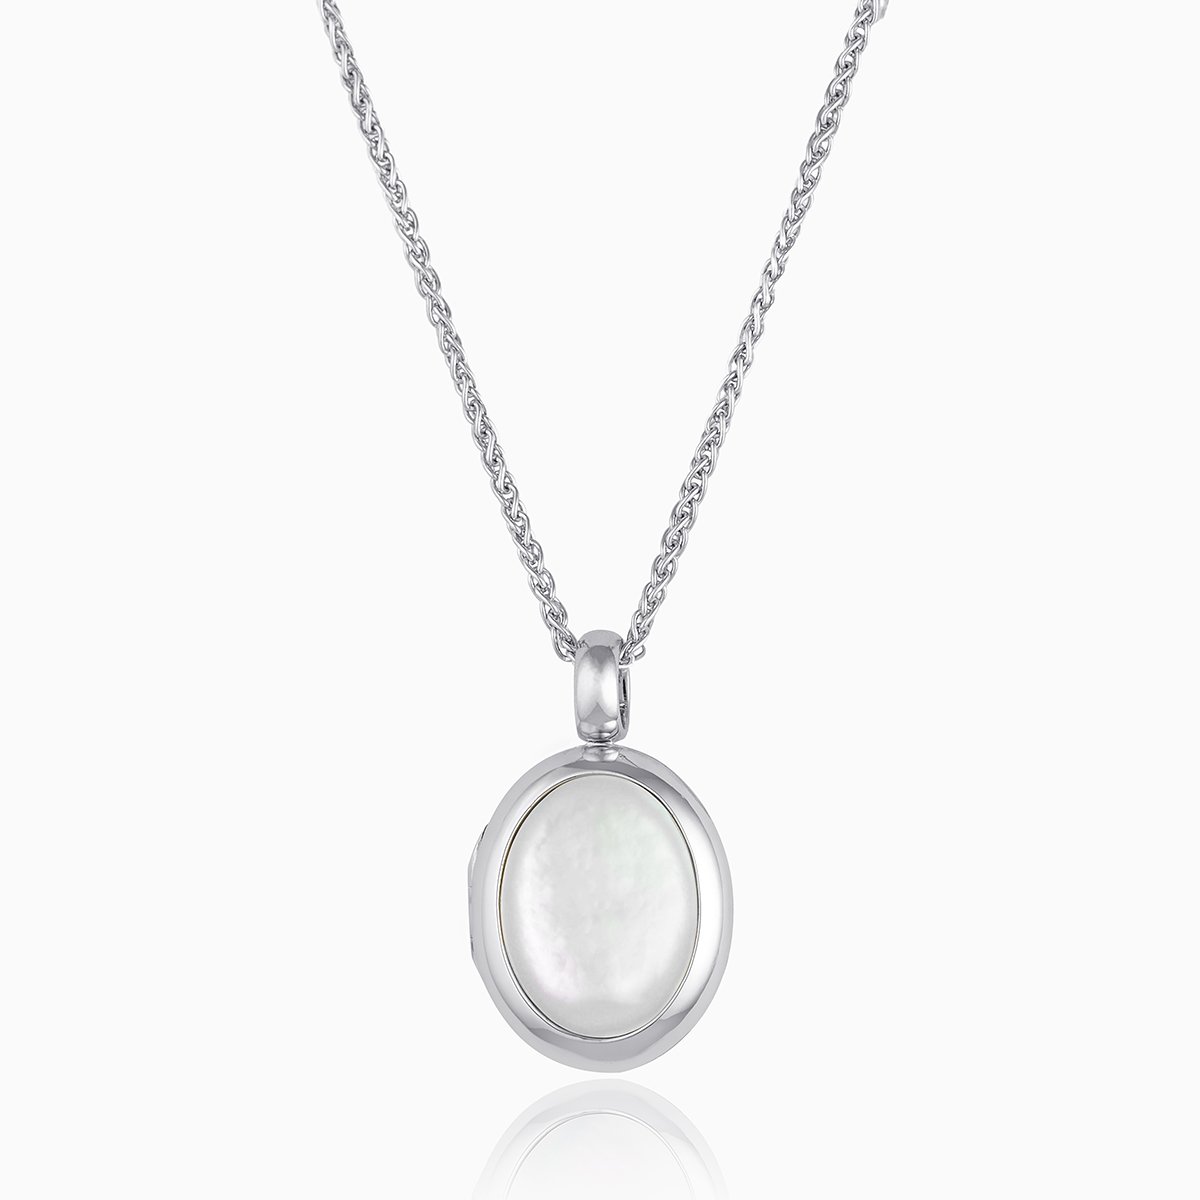 18 ct white gold oval locket set with mother of pearl, on an 18 ct white gold spiga chain